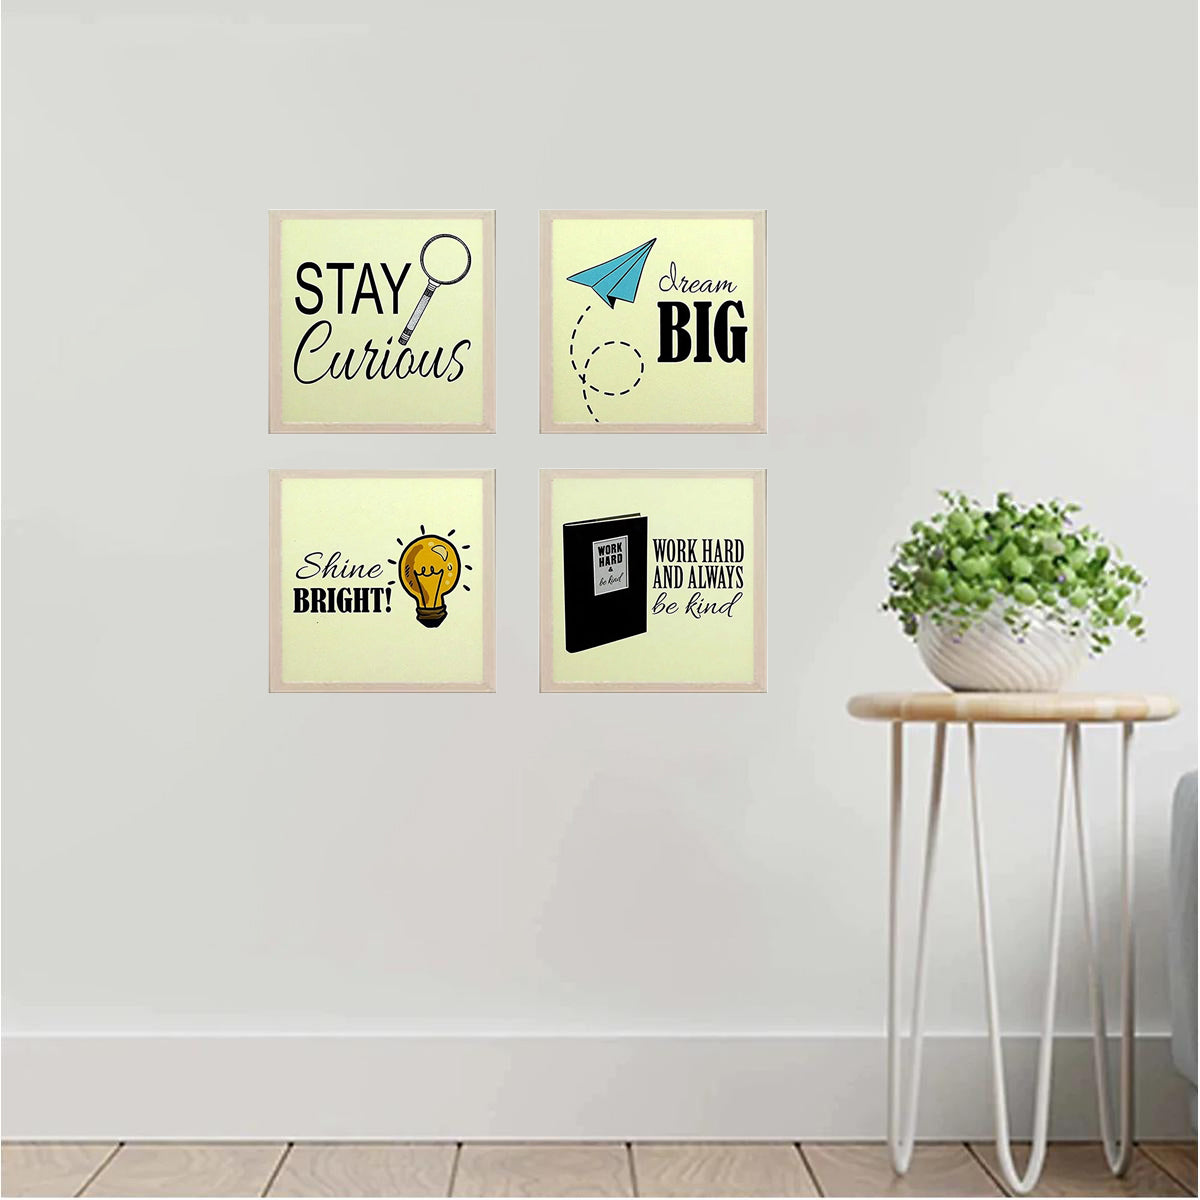 4 Pcs Office Wall Inspirational Quotes Frames set